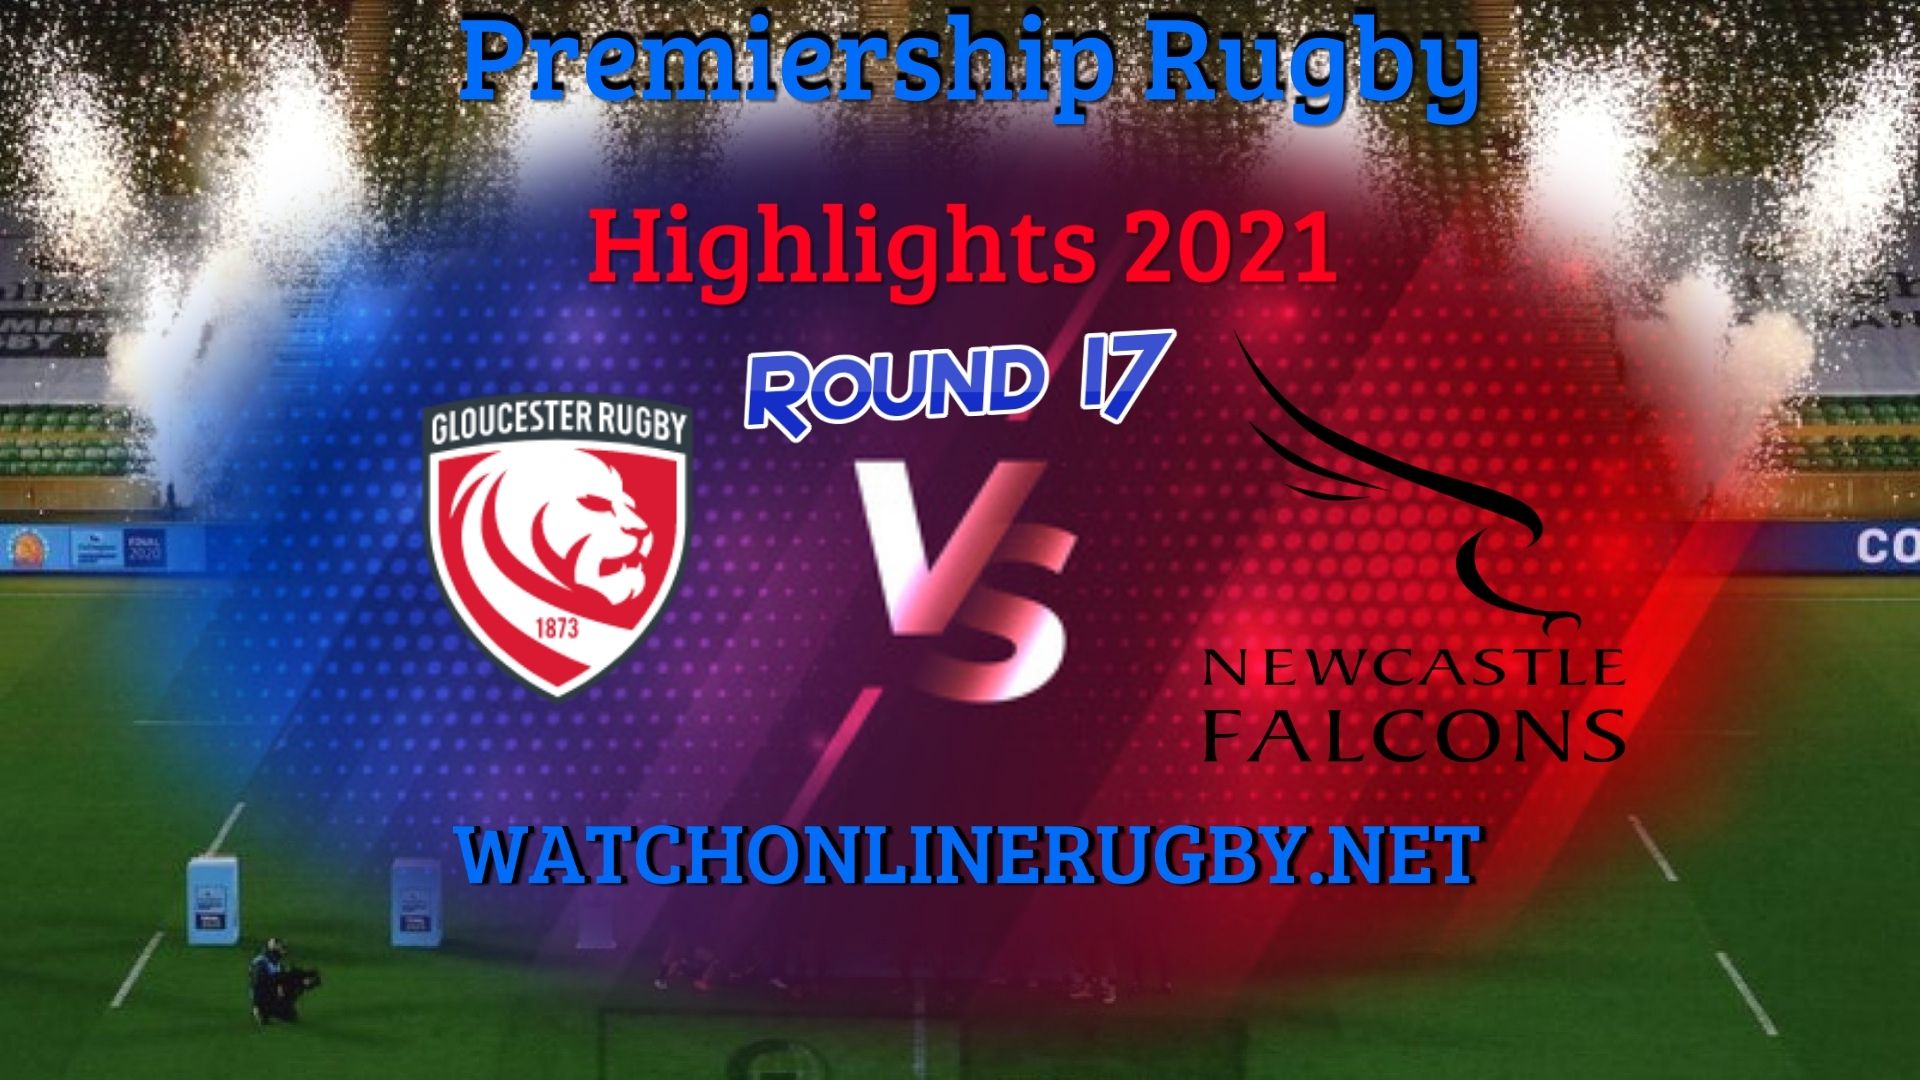 Gloucester Rugby Vs Newcastle Falcons Premiership Rugby 2021 RD 17